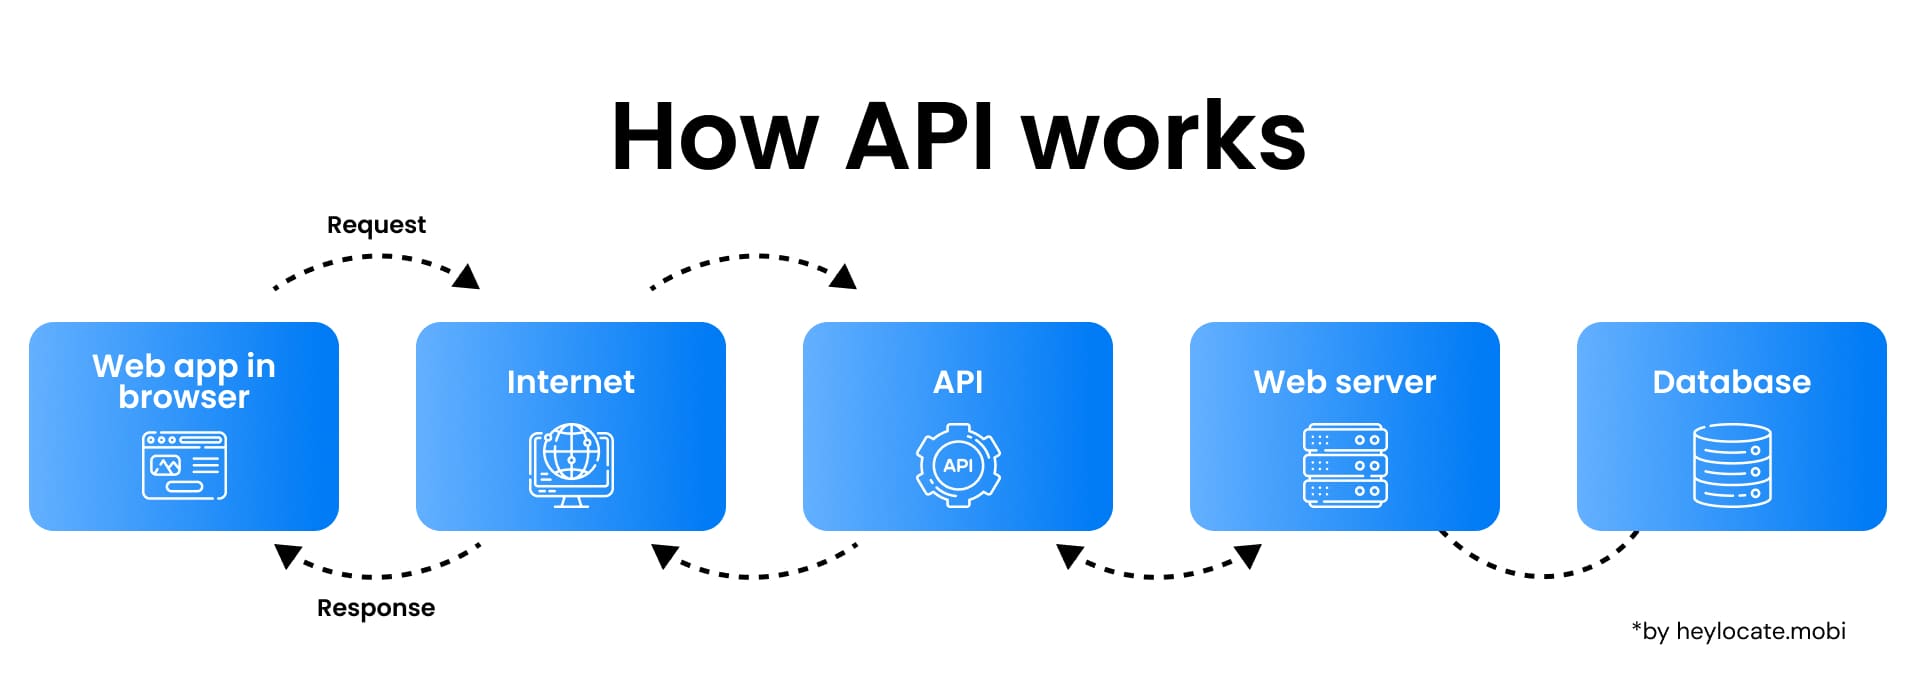 A diagram illustrating the workflow of an API, with the sequence: "a web application in a browser" sends a request over the "internet" to an "API" which communicates with a "web server" and then to a "database". The database sends a response back through the web server and the API, which ultimately returns to the web application in the browser